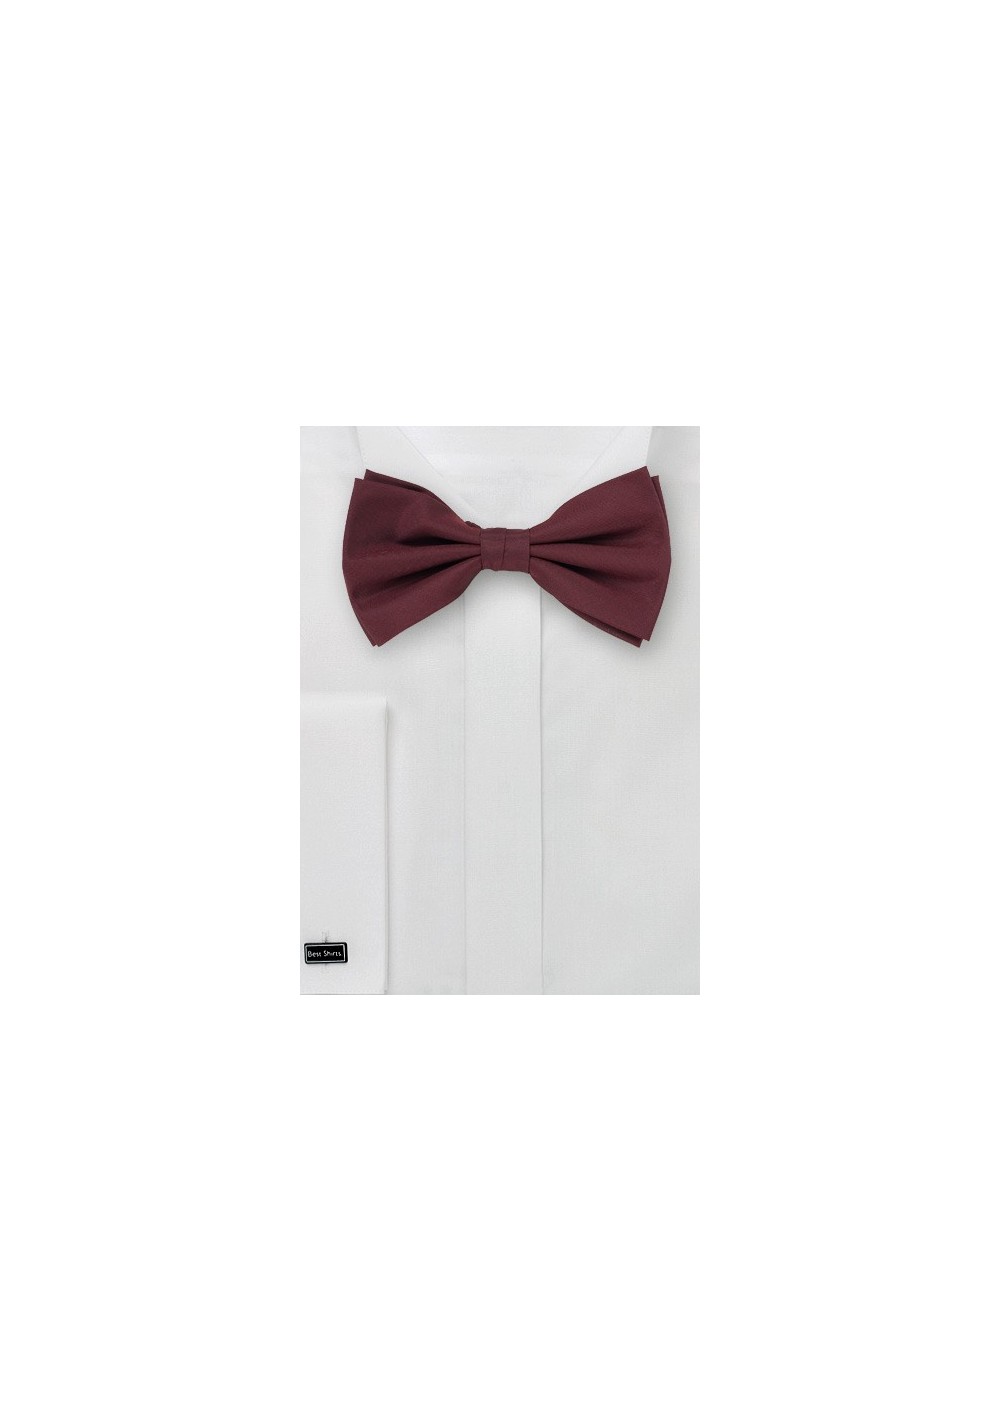 Burgundy Red Bow Ties - Silk Bow Tie & Matching Pocket Square